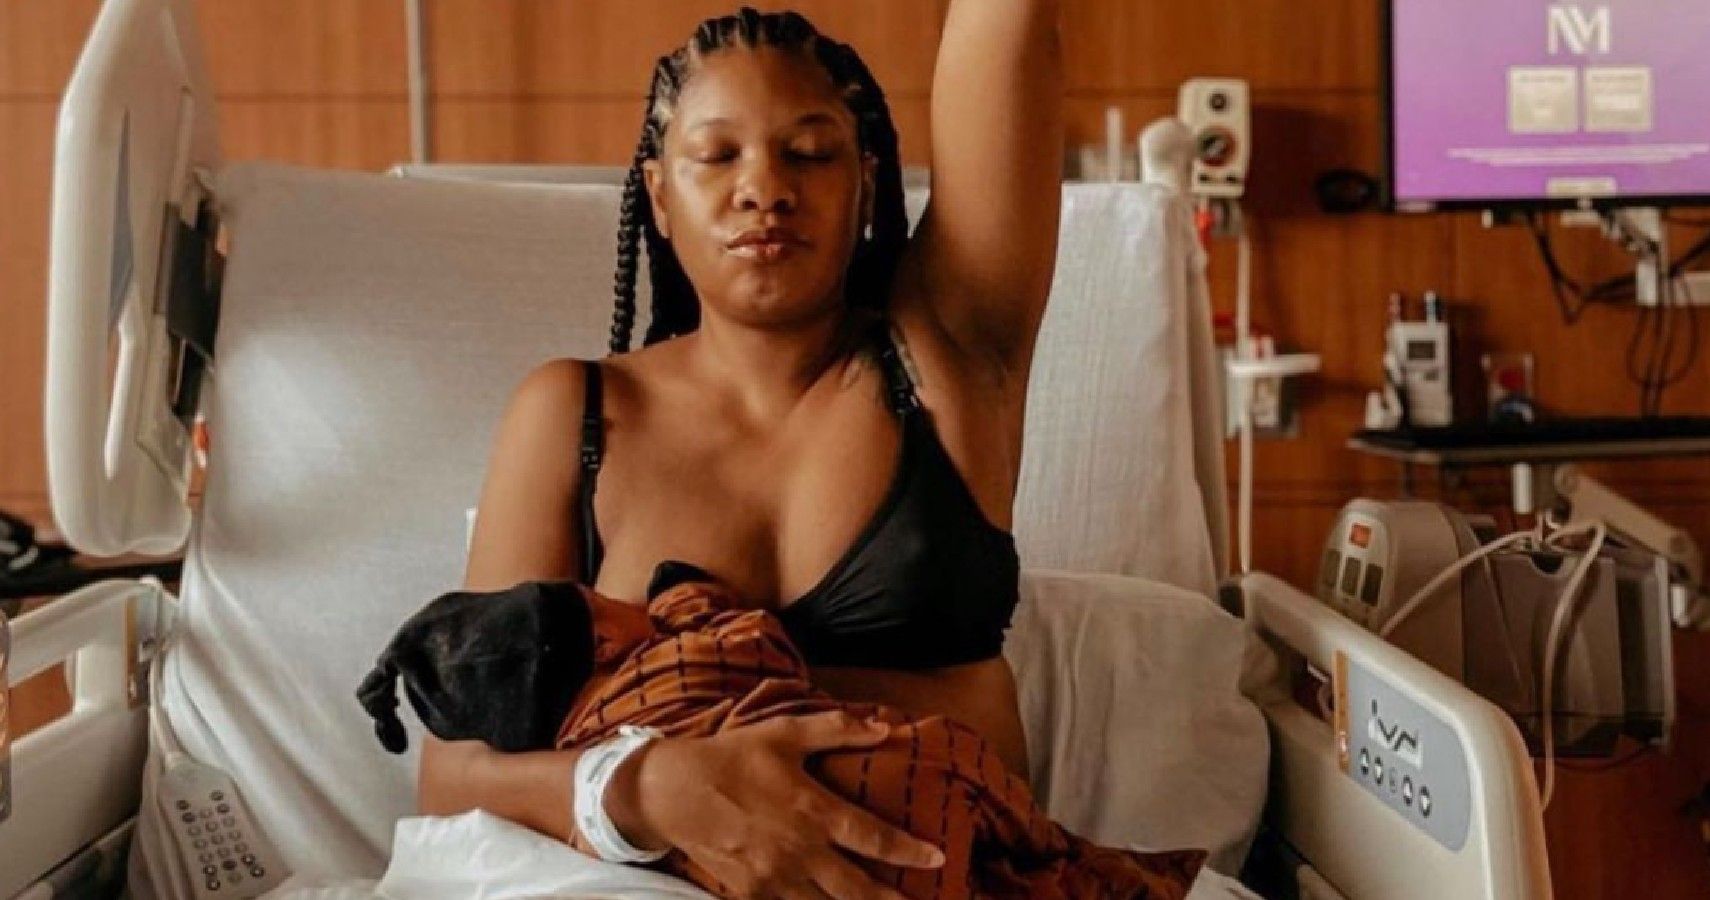 Woman Proudly Nursing Baby After Giving Birth